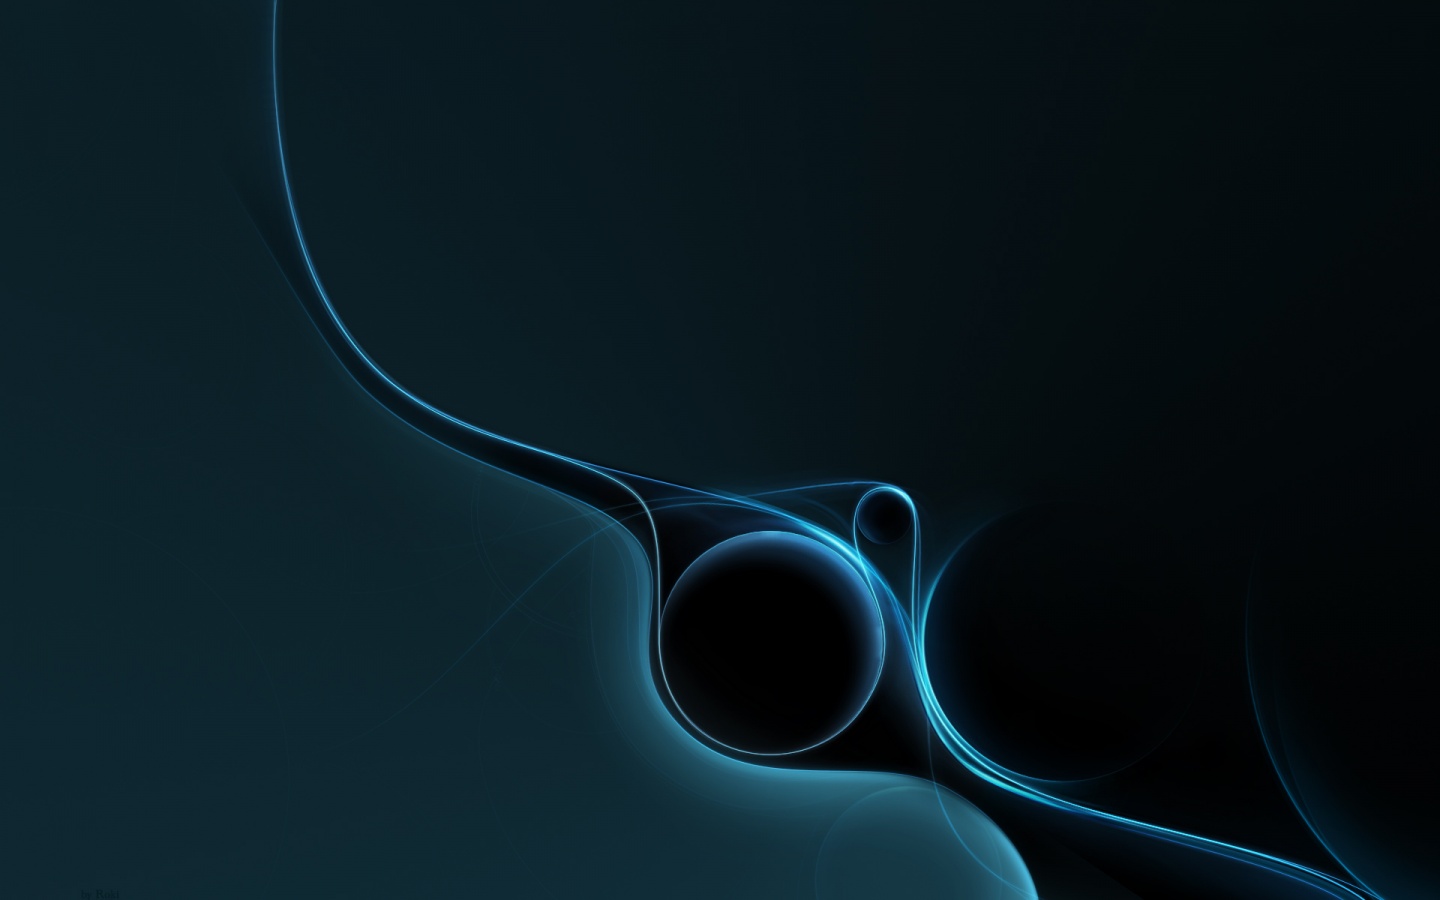  Windows 8 Background Abstract Blue Curves Windows 8 Wallpaper x